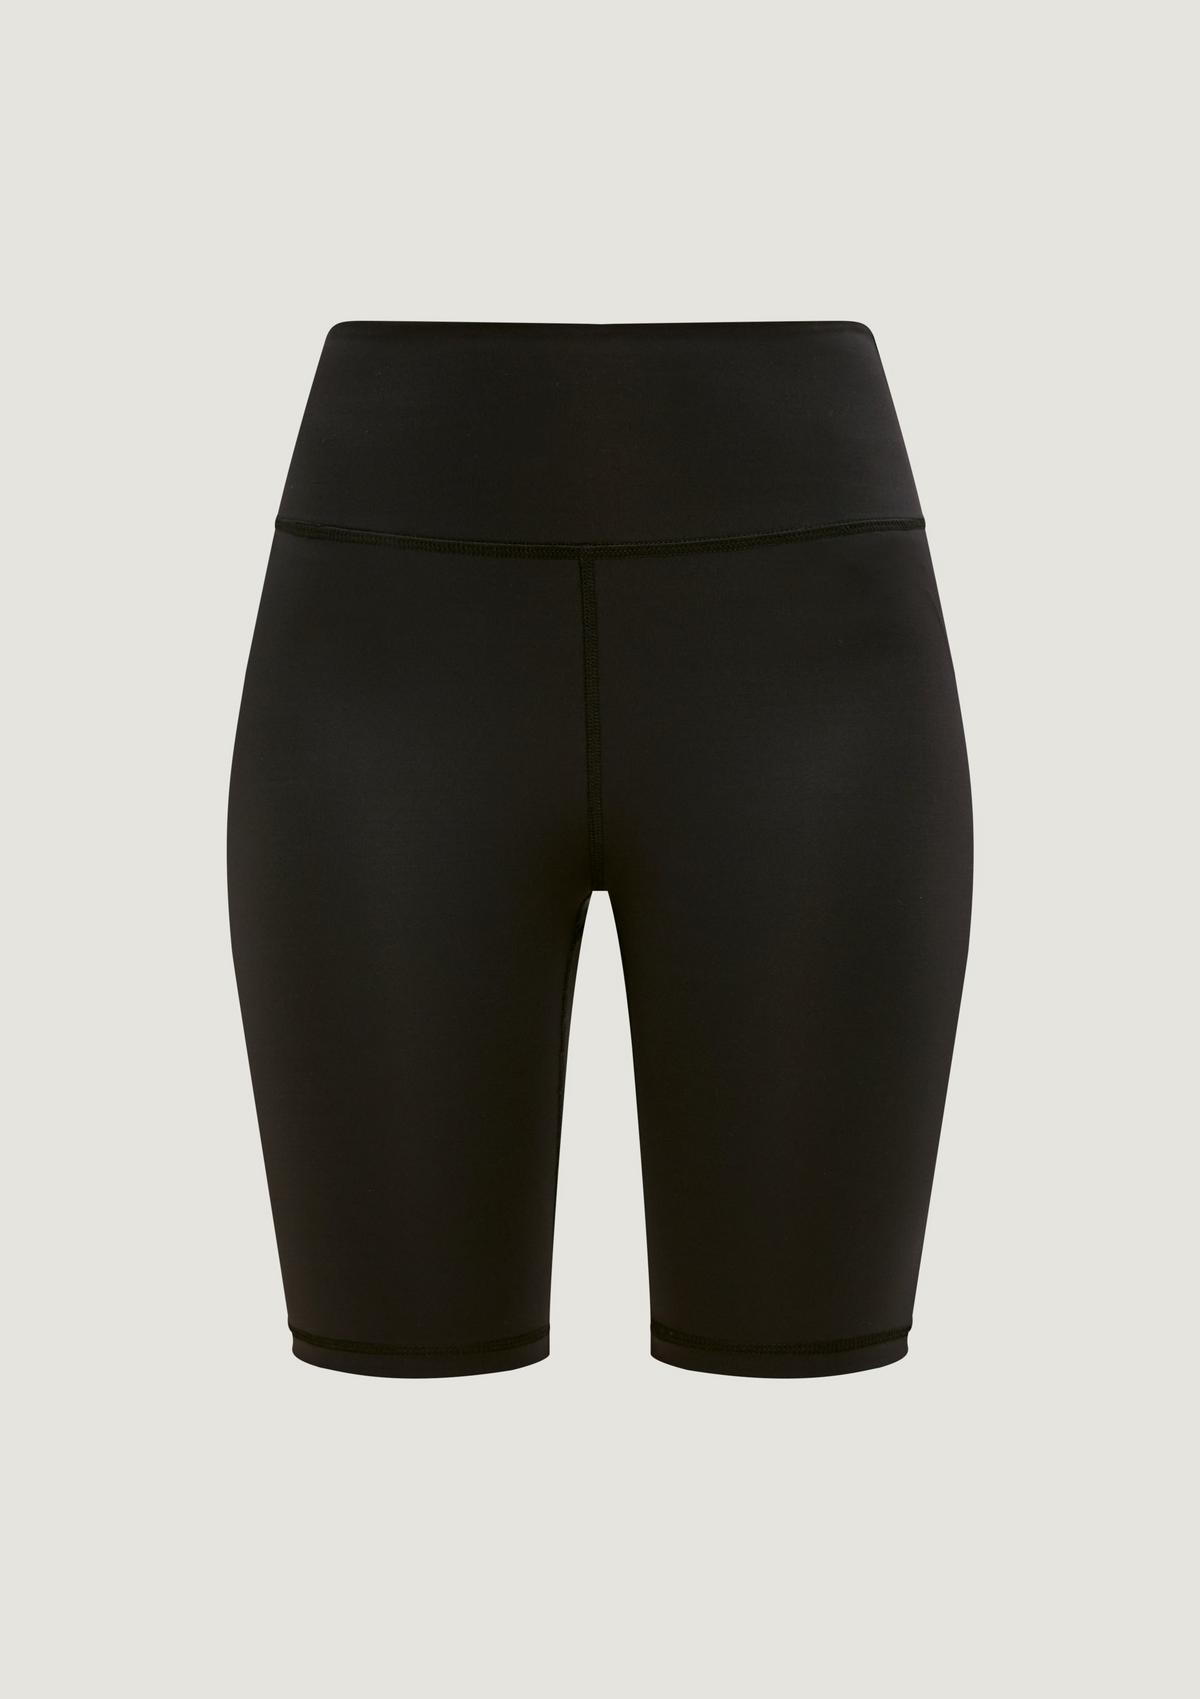 comma Skinny: super stretchy cycling shorts